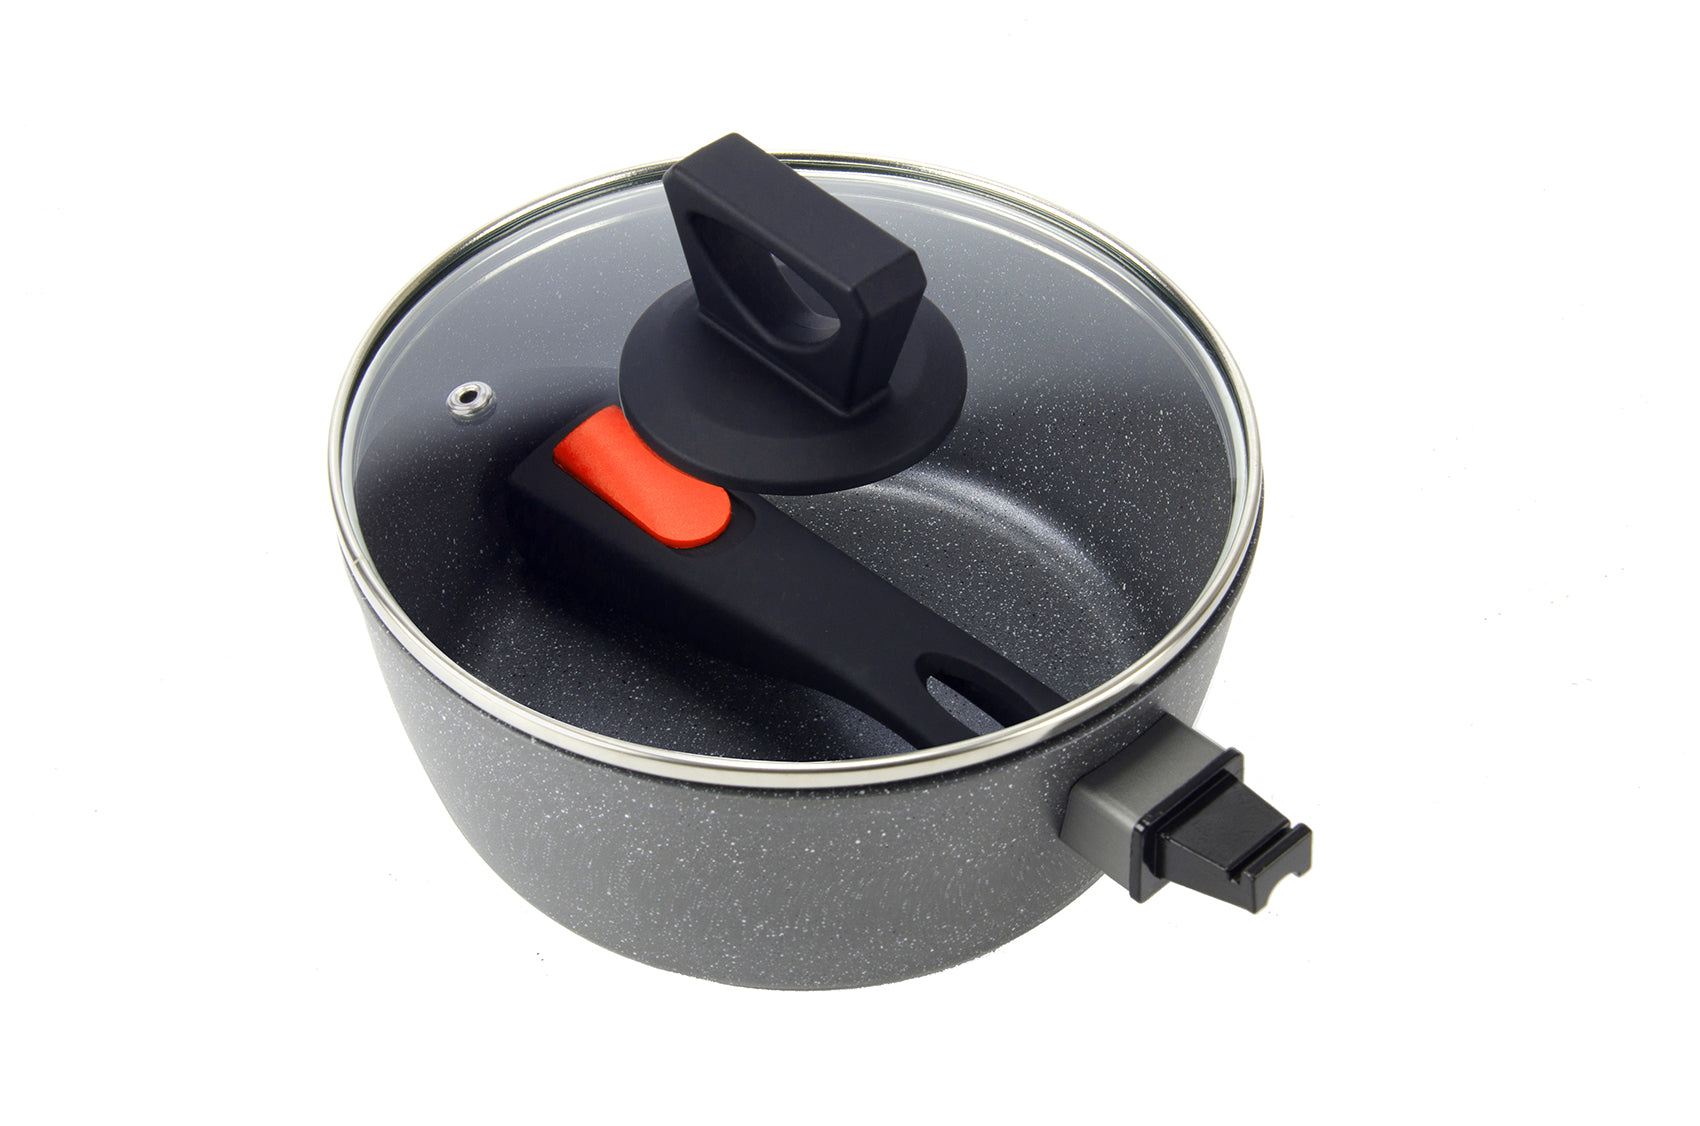 18CM NON STICK SAUCEPAN WITH DETACHABLE HANDLE AND LID